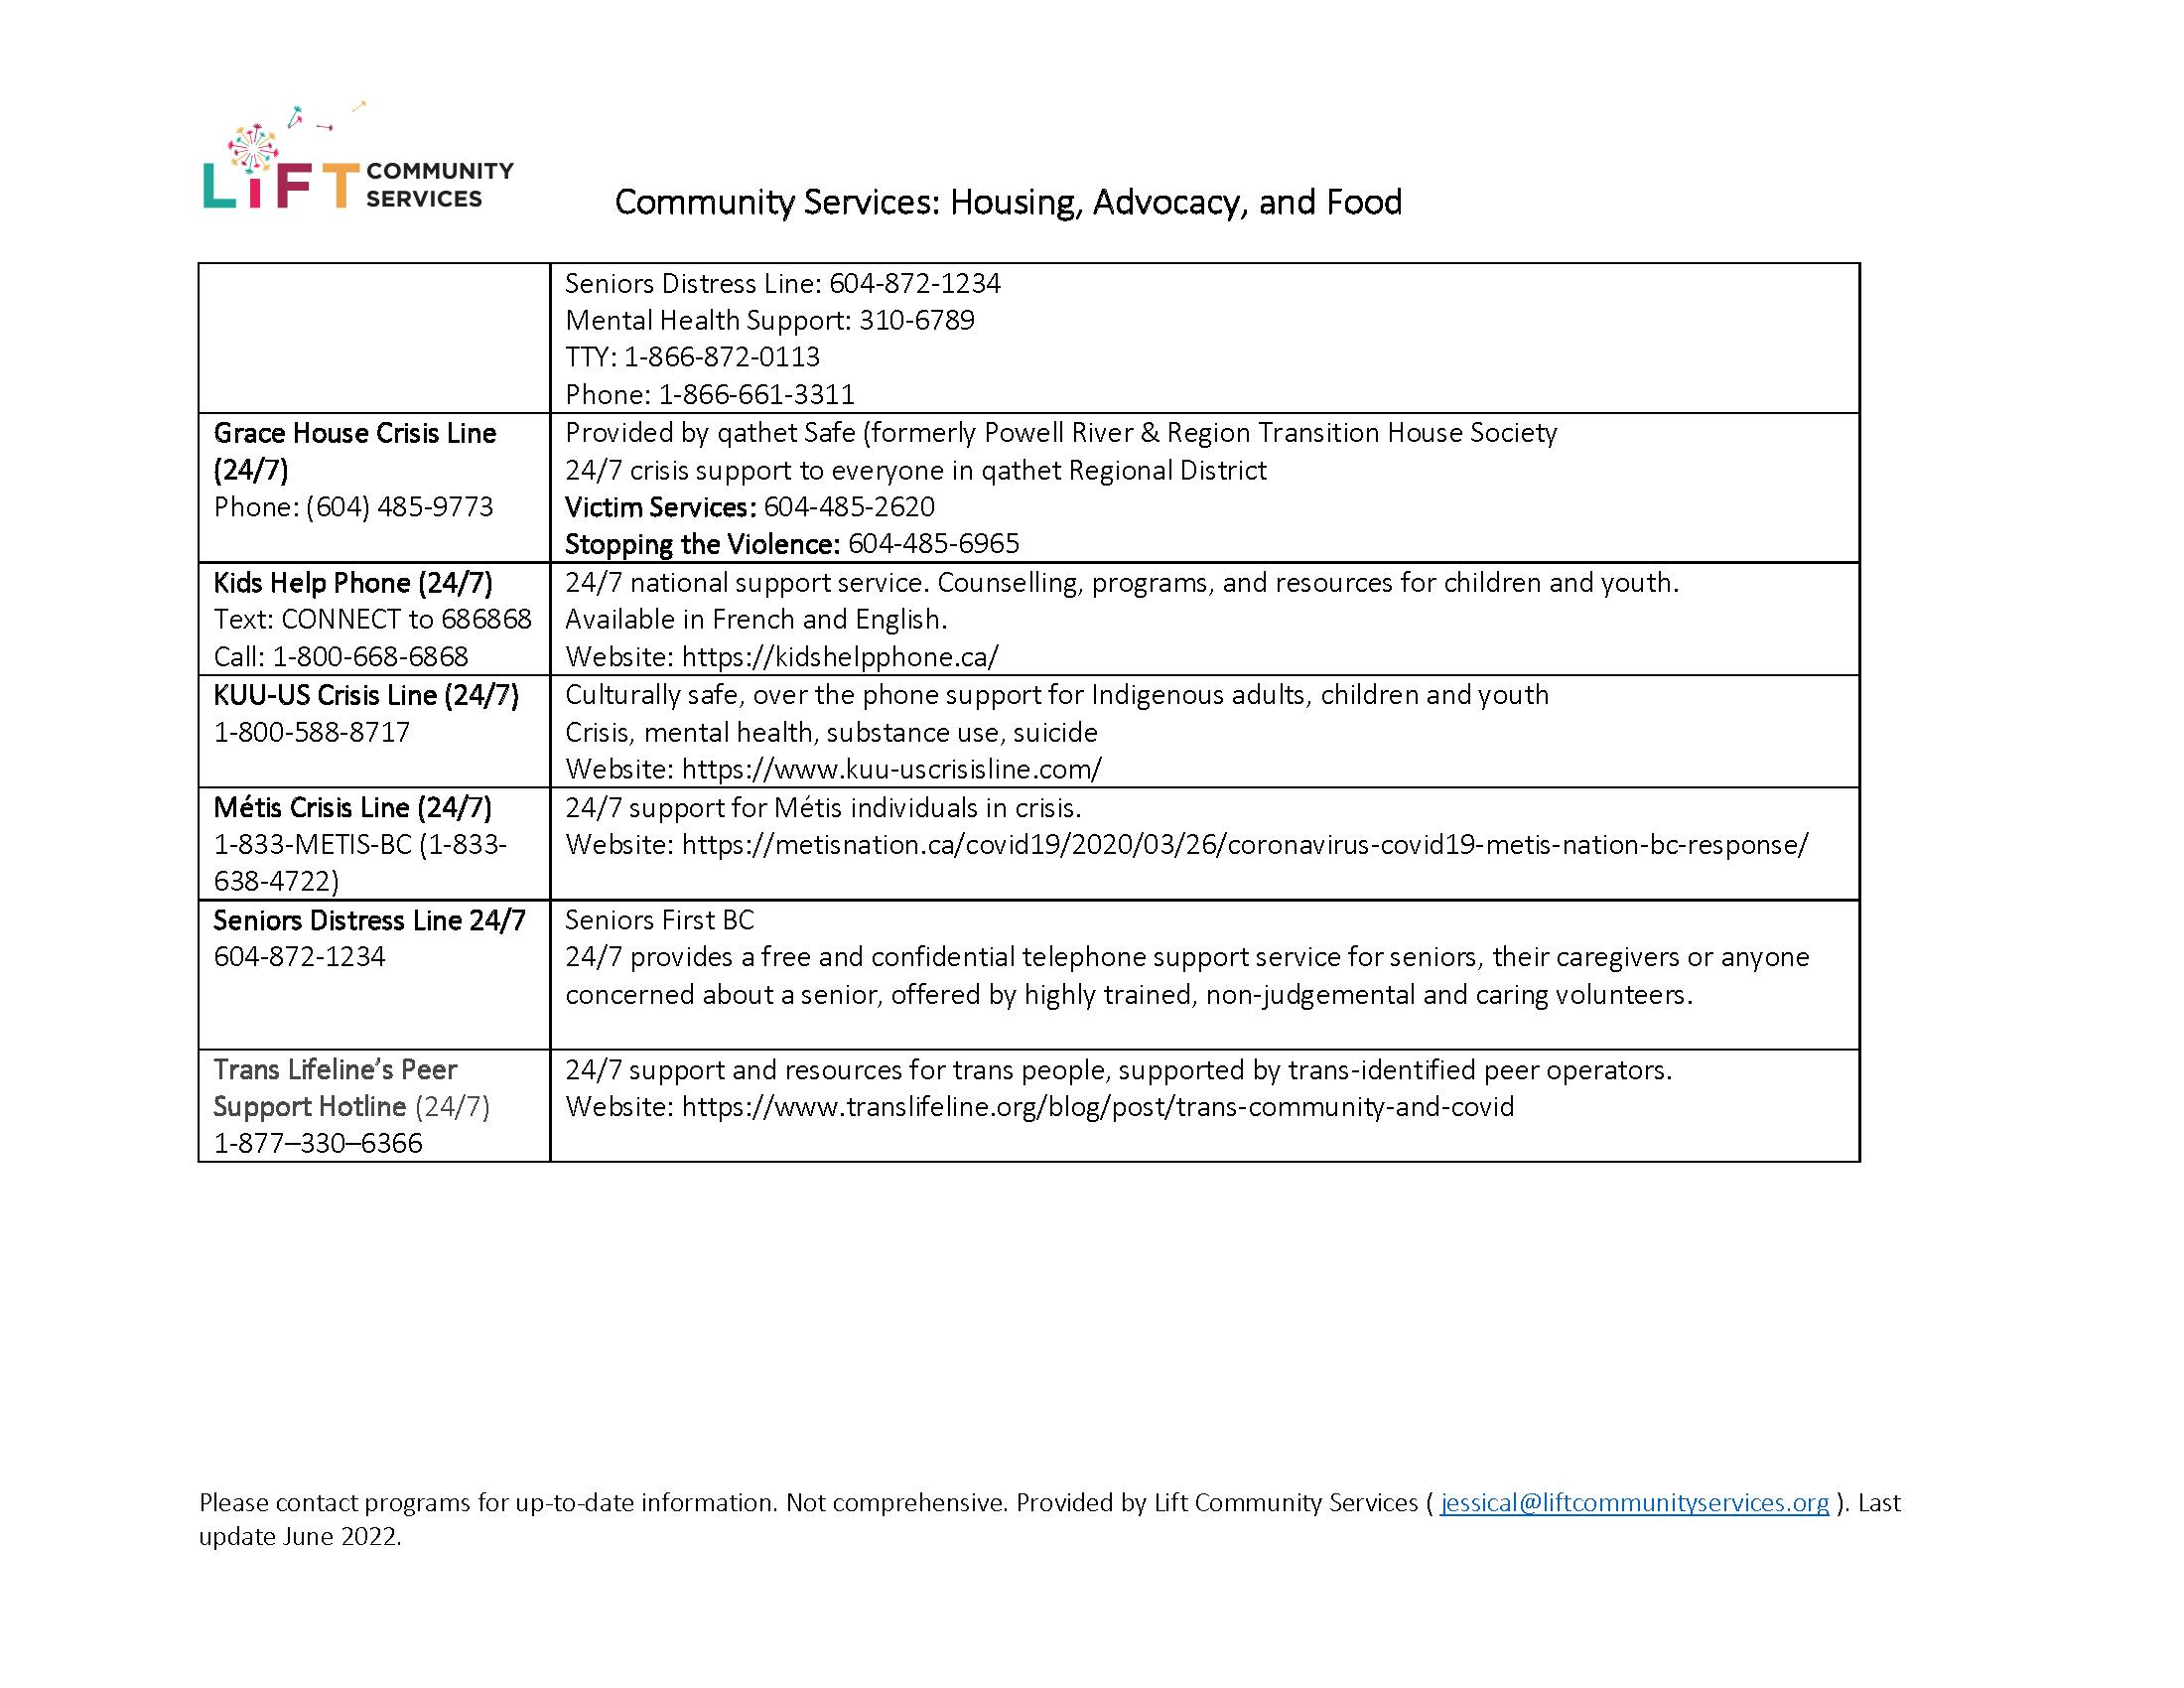 JUNE 2022 Community Resources List_Page_7.png